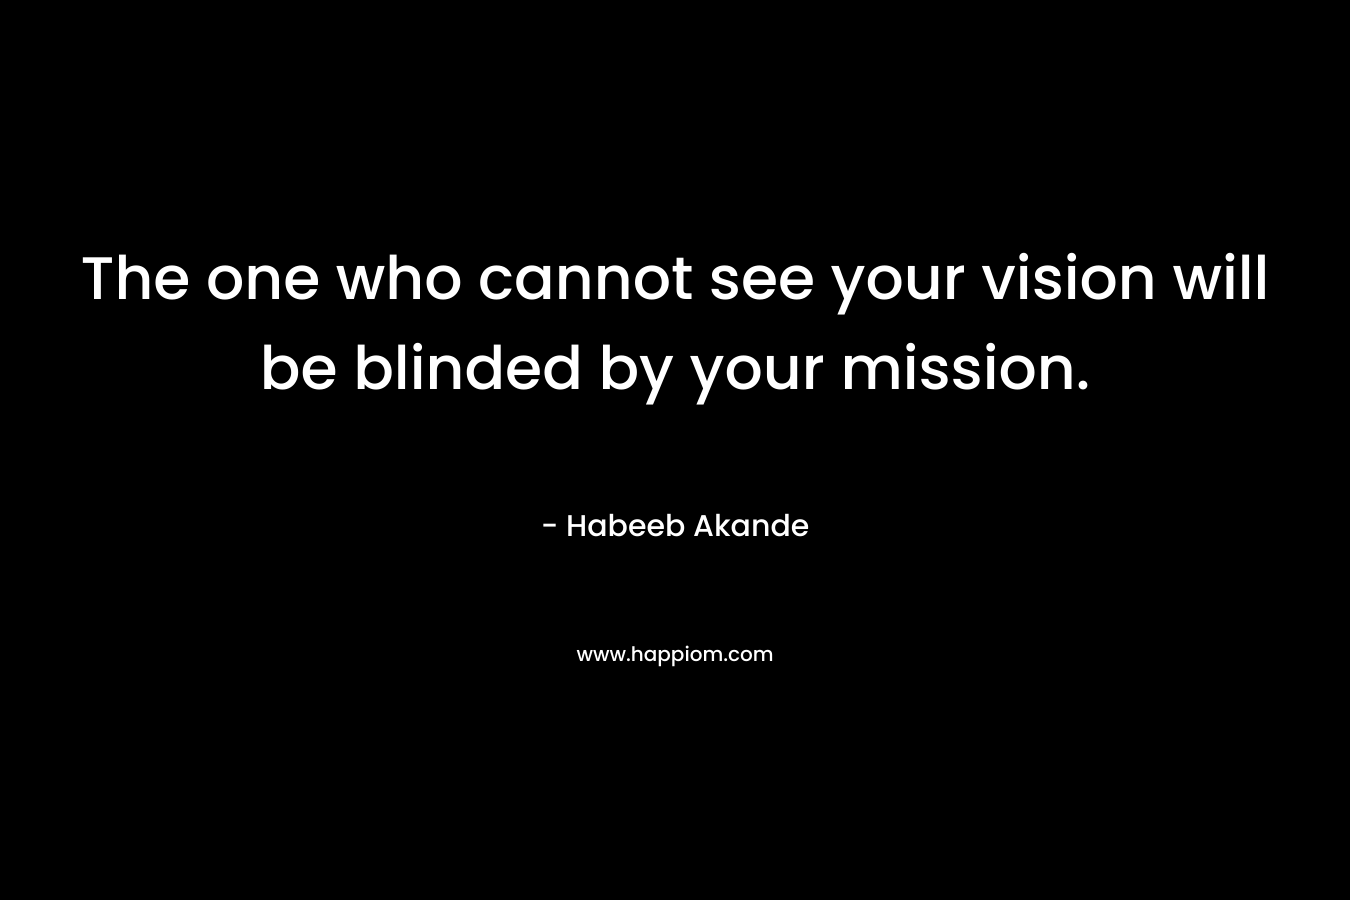 The one who cannot see your vision will be blinded by your mission.